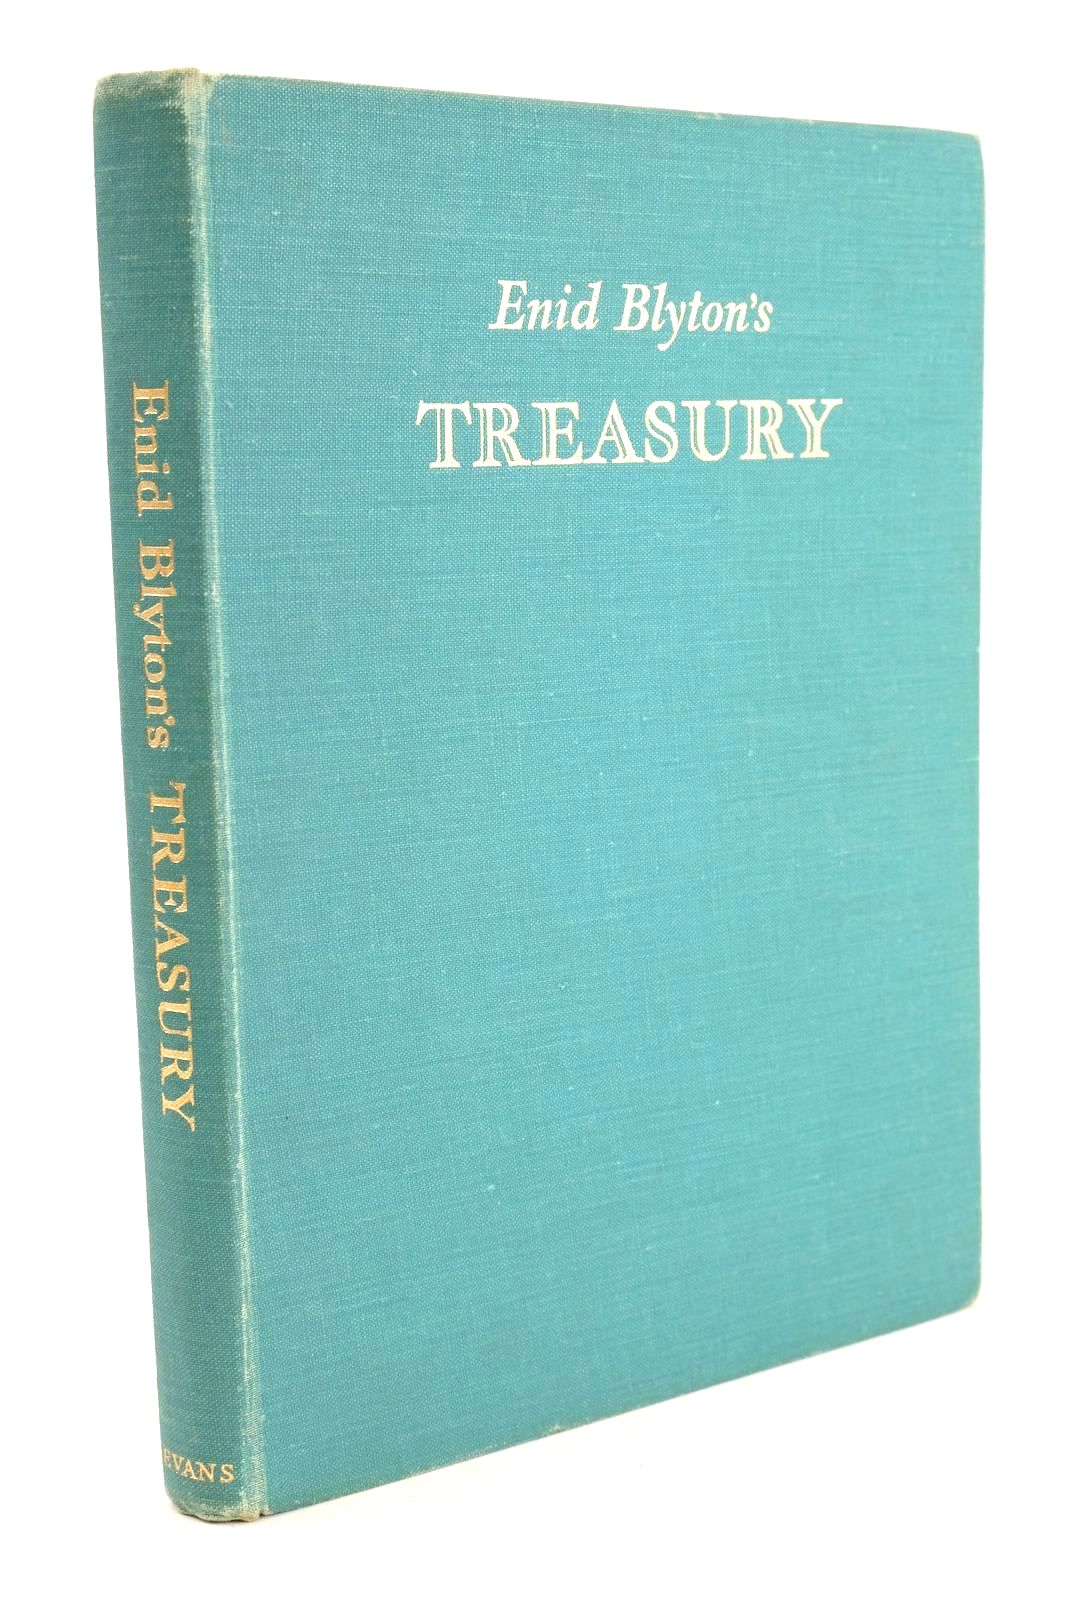 Photo of ENID BLYTON'S TREASURY written by Blyton, Enid illustrated by Brock, H.M. Lloyd, Stanley Higham, Geoffrey Mansell, E. et al., published by Evans Brothers Limited (STOCK CODE: 1324609)  for sale by Stella & Rose's Books